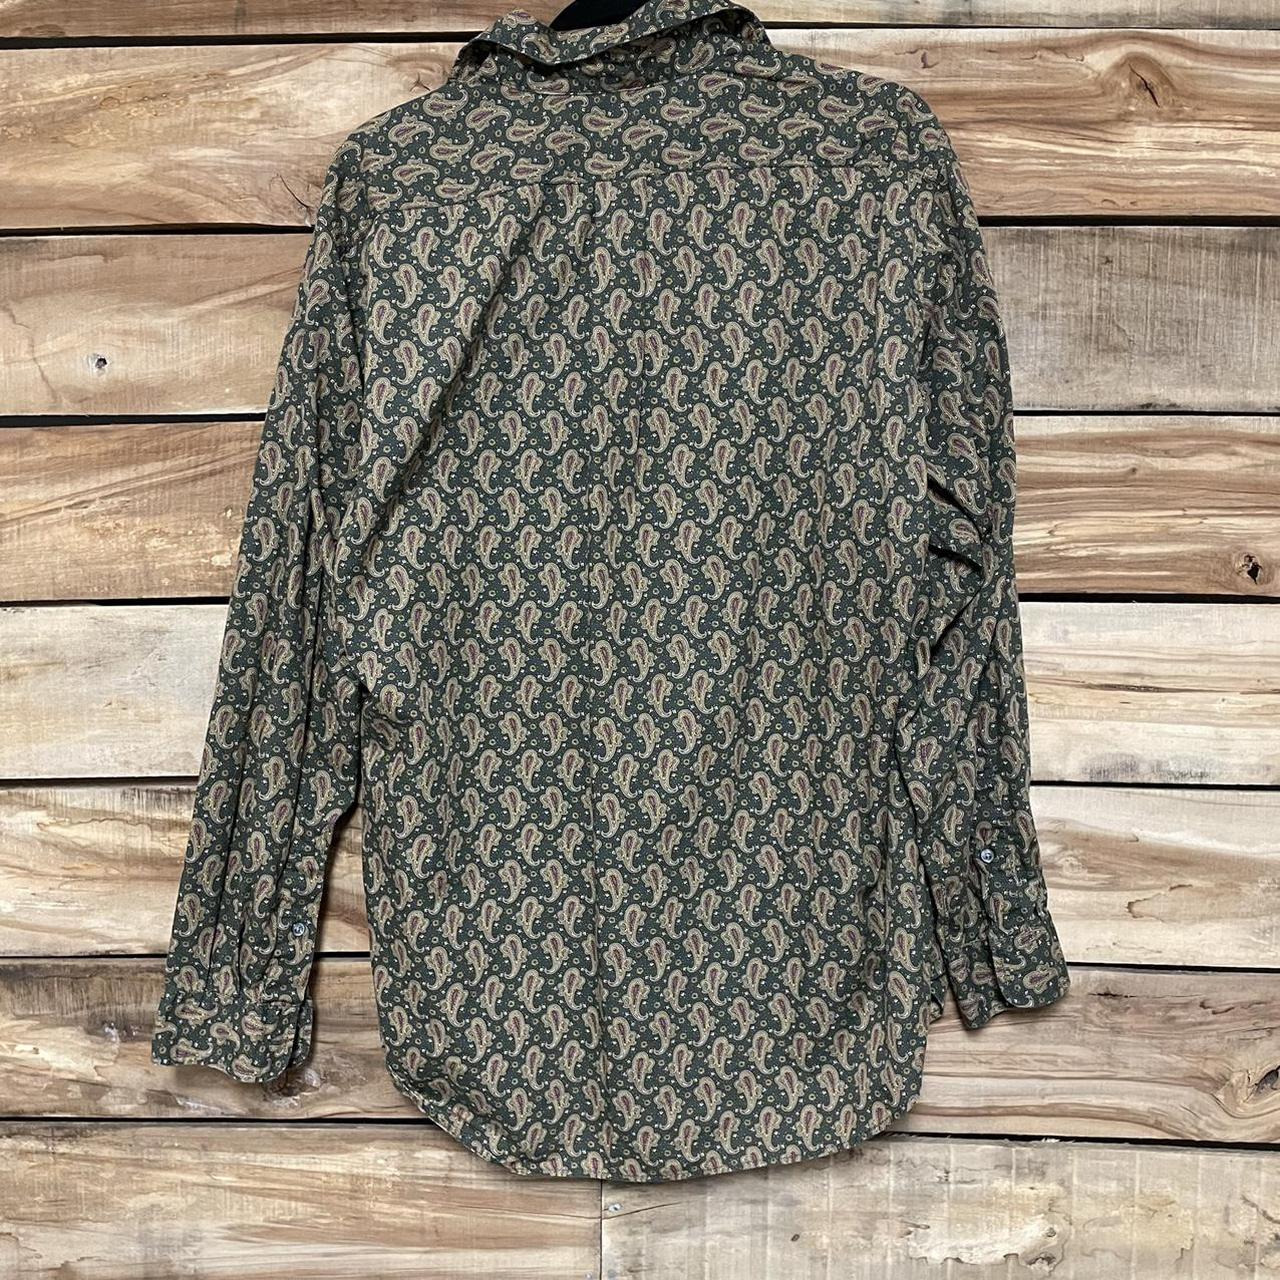 Product Image 3 - Cremieux
Green
Good condition
Size large
All-over print shirt,